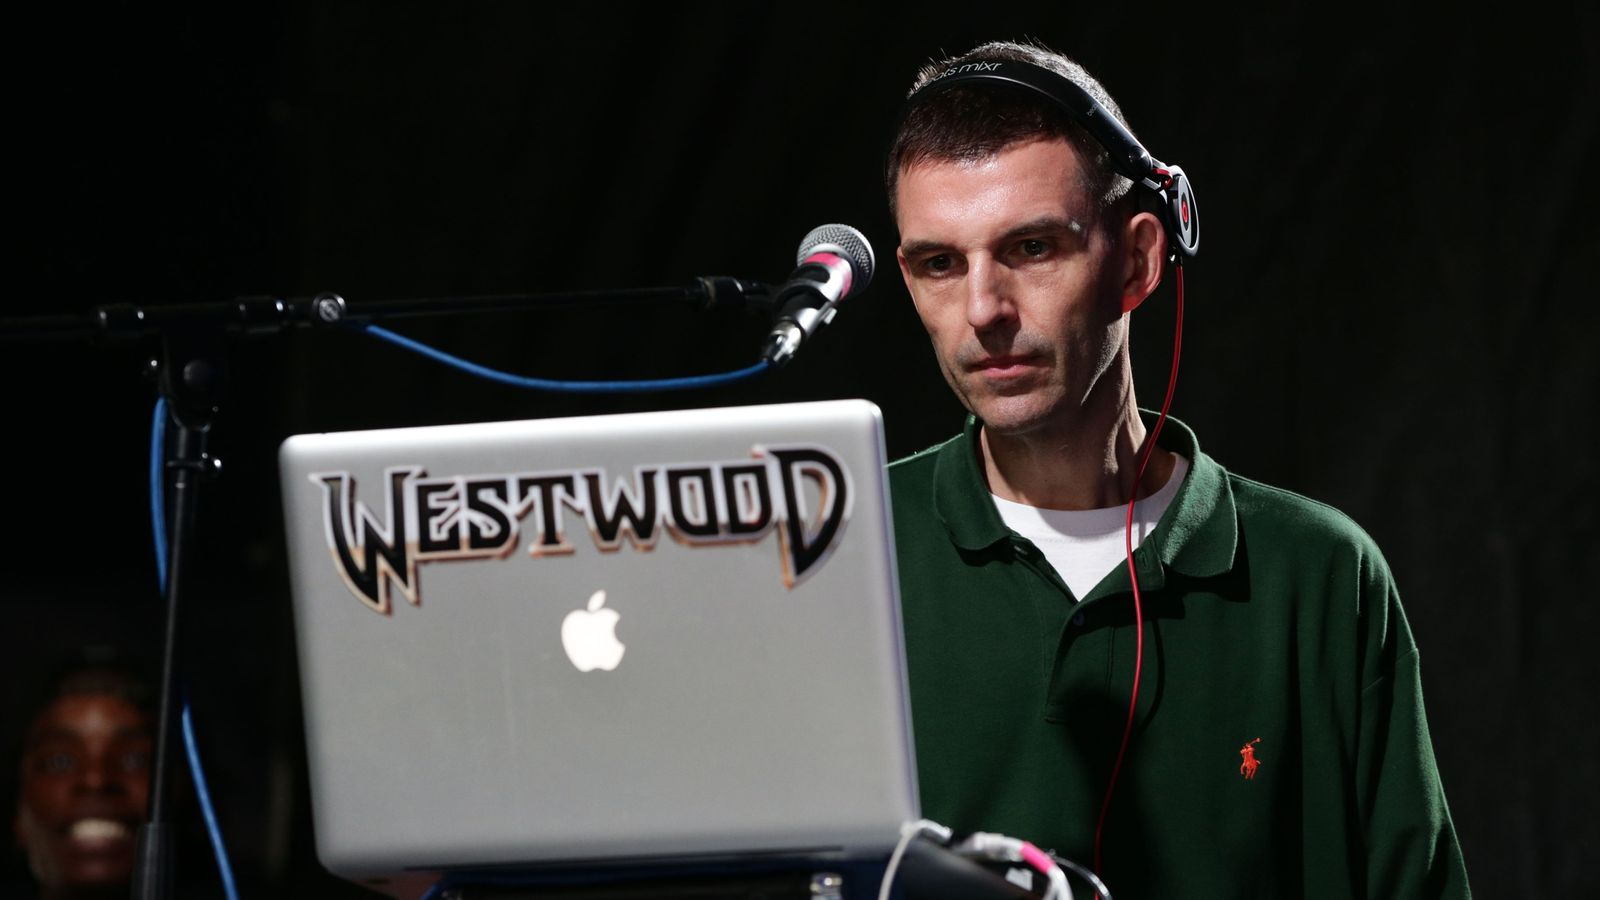 Tim Westwood evidence deadline extended in review of DJ's conduct while working at BBC